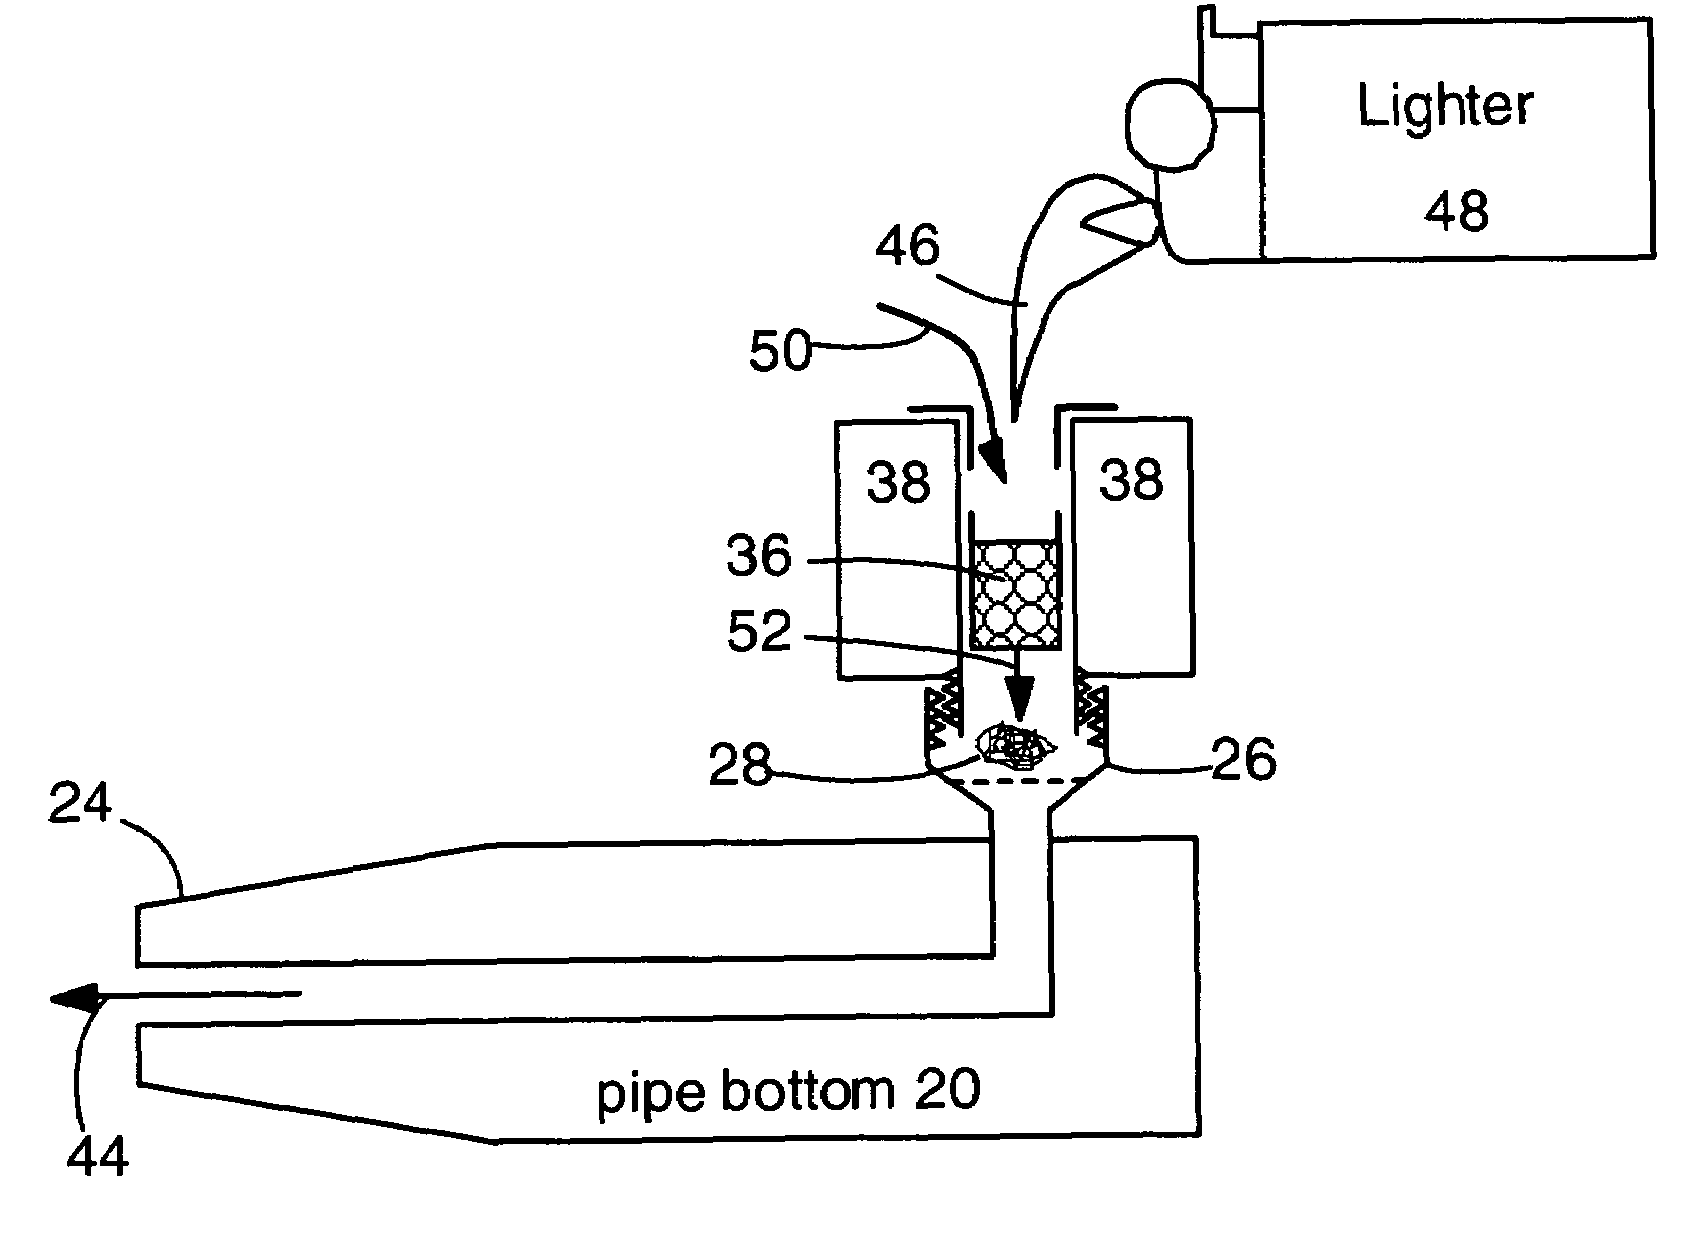 Vaporization pipe with flame filter